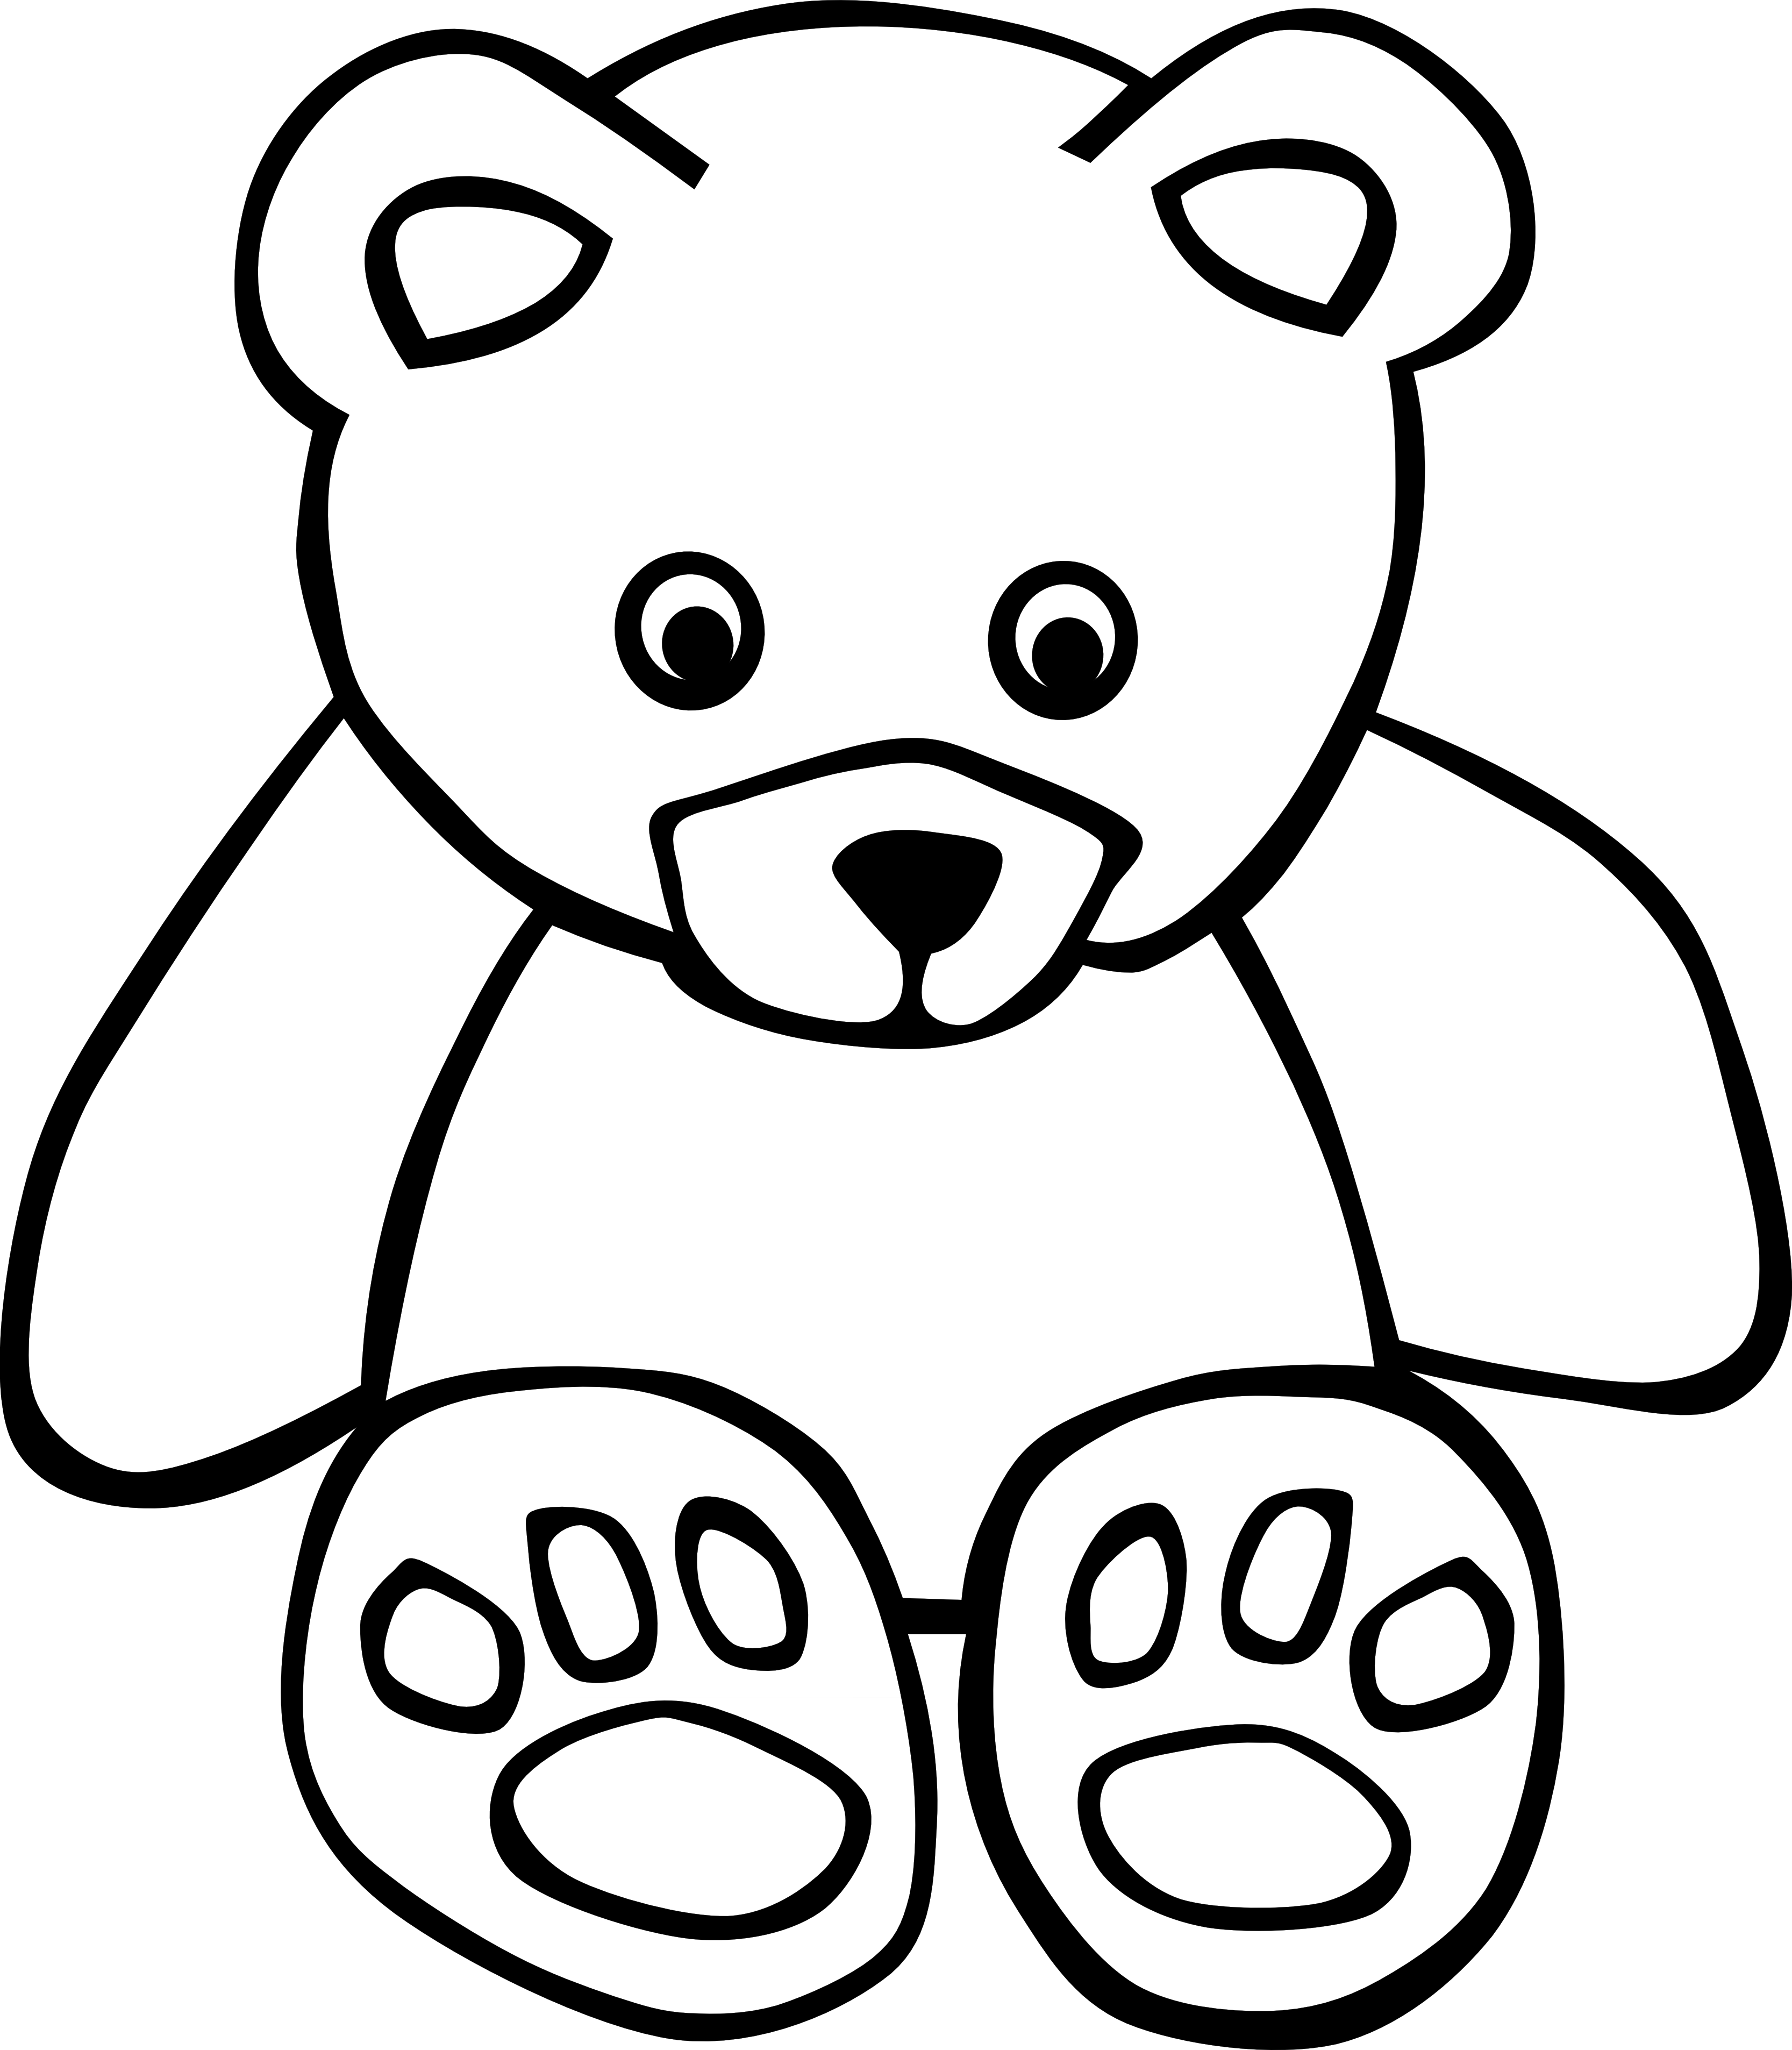 Baby Teddy Bear Clipart | Clipart Panda - Free Clipart Images